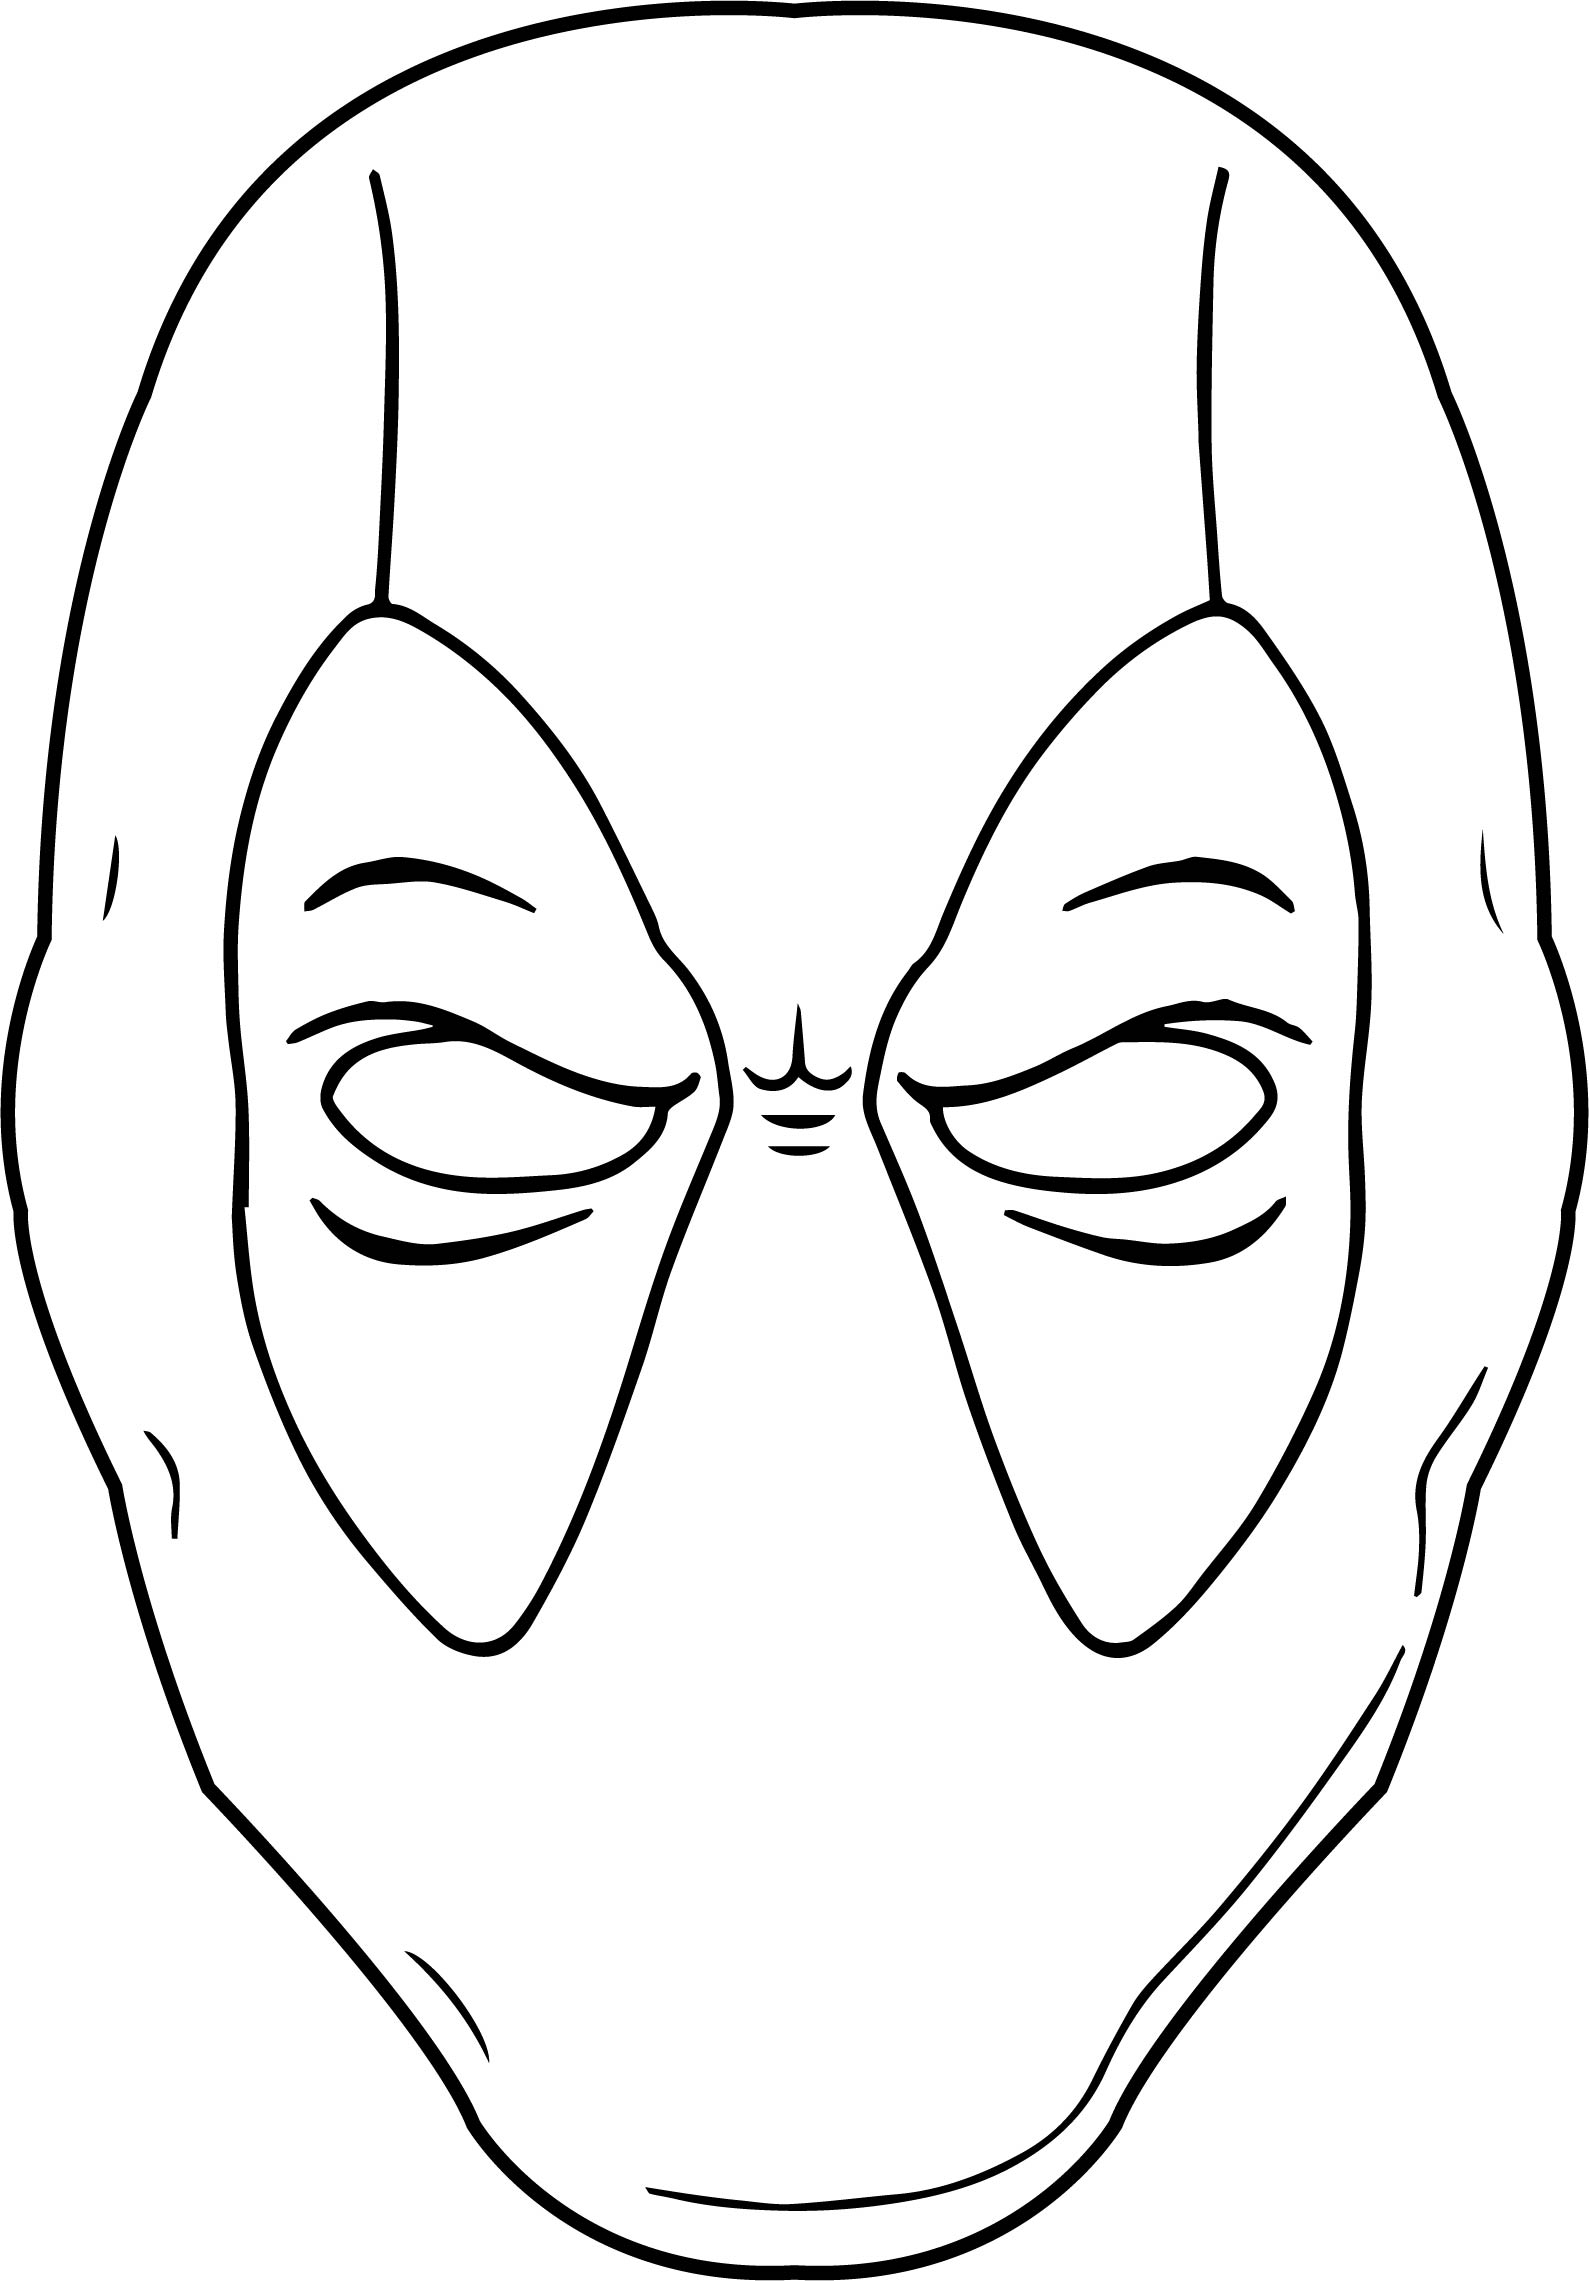 deadpool mask template learn how to draw deadpool mask deadpool step by step mask deadpool template 